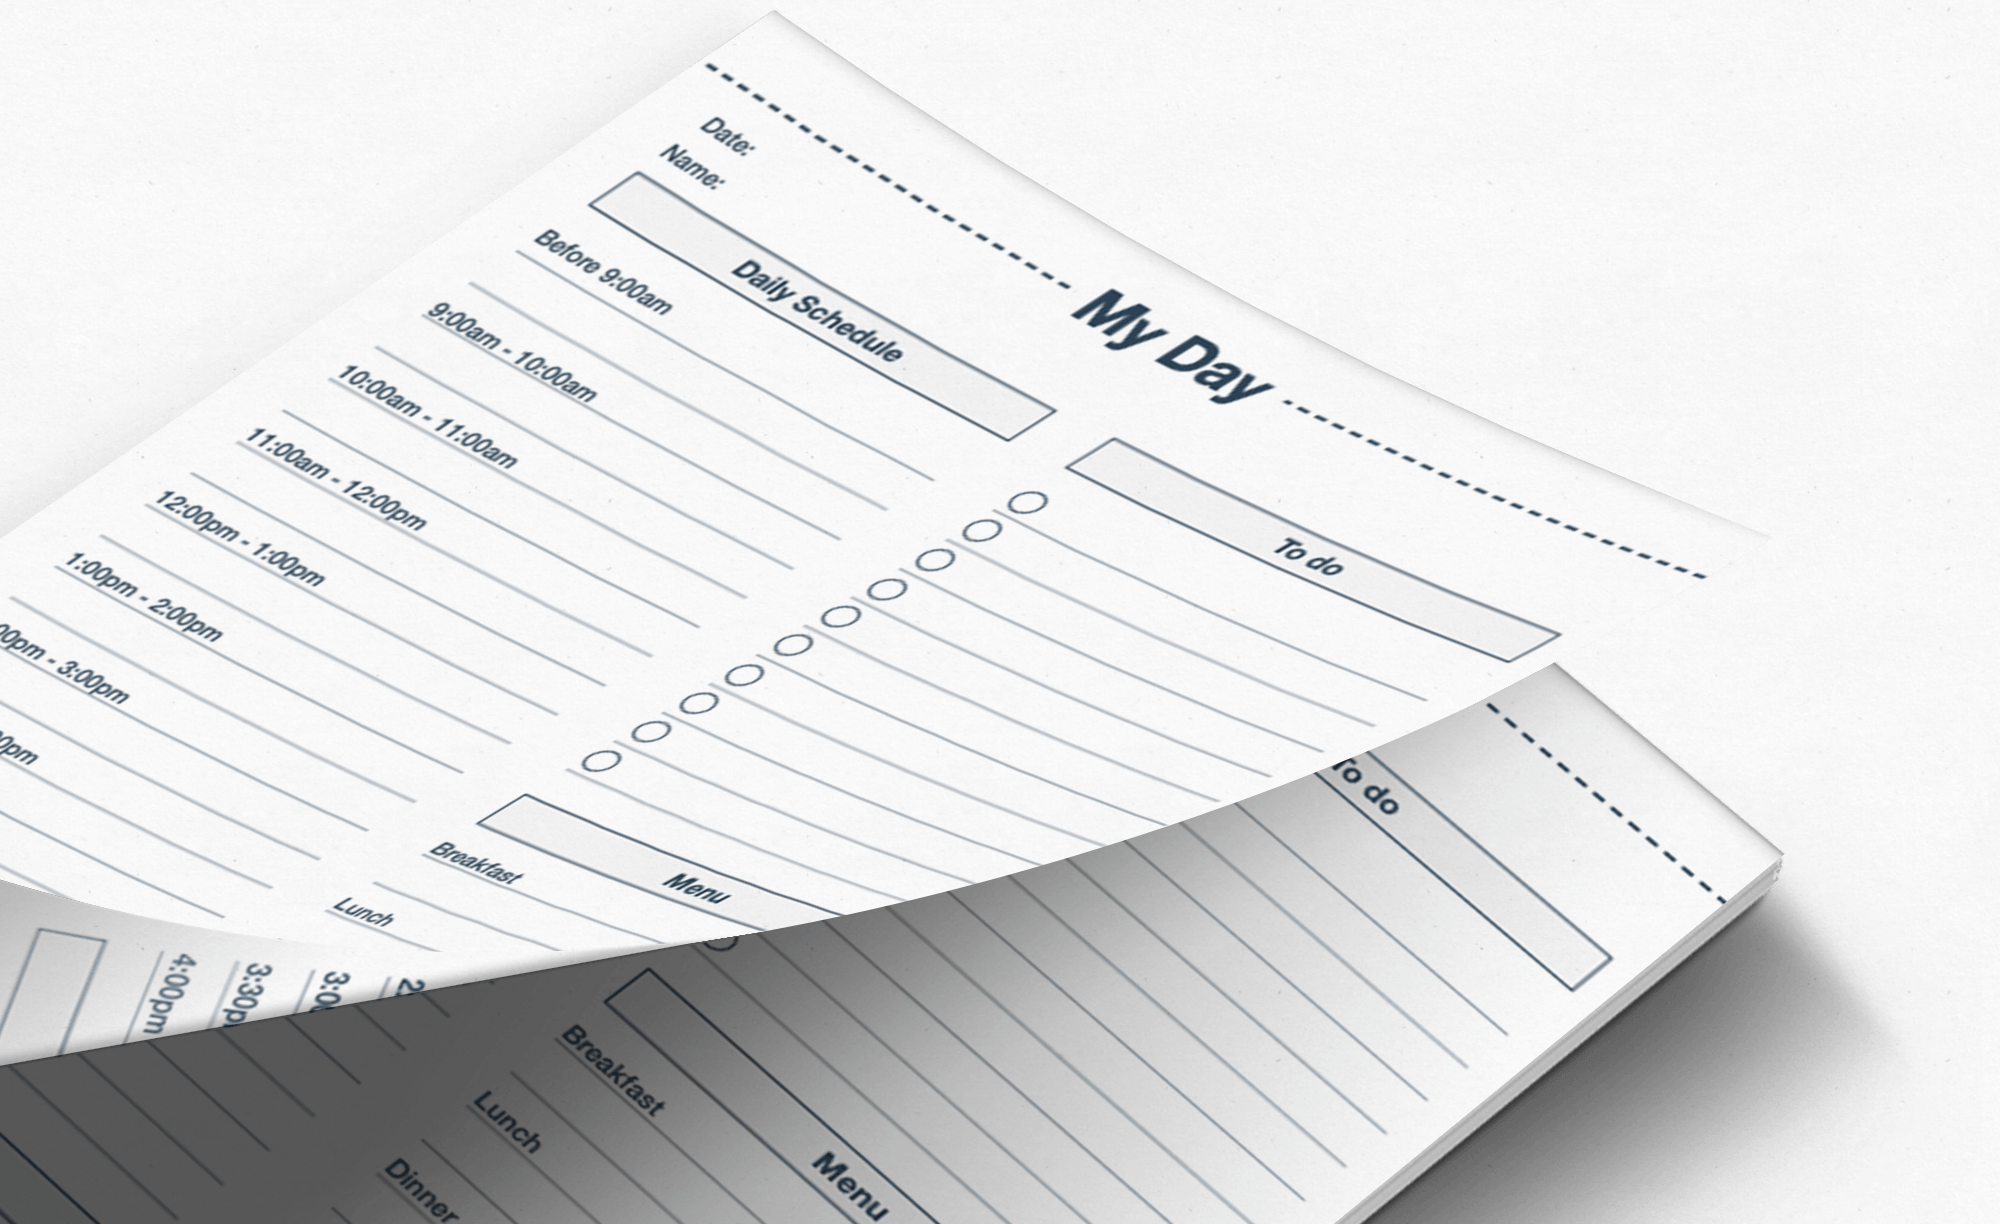 mockup of "My Day" resource